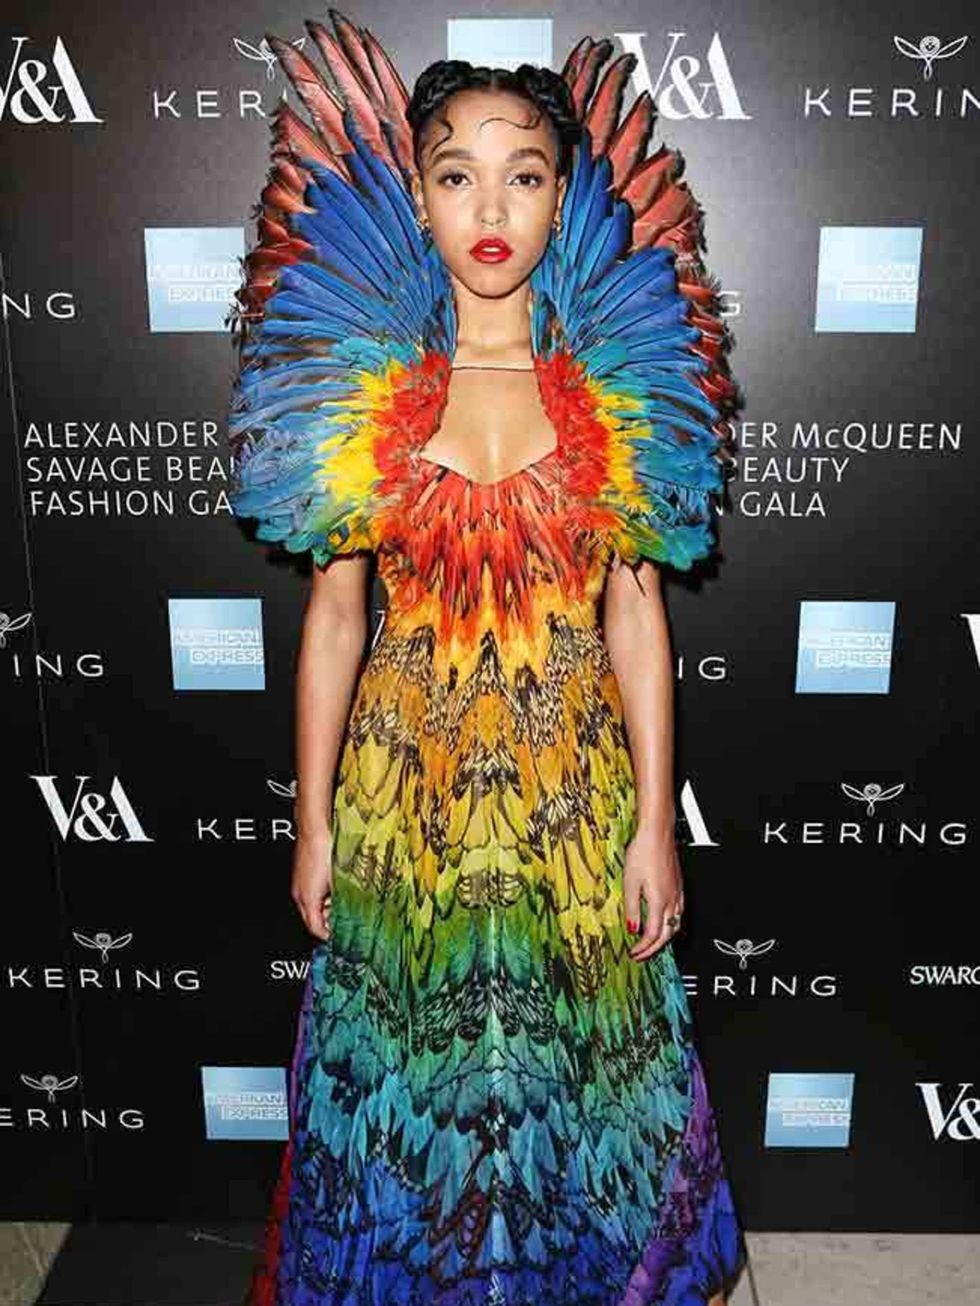 FKA Twigs at the 'Alexander McQueen: Savage Beauty Gala' at the Victoria & Albert Museum in London, March 2015.